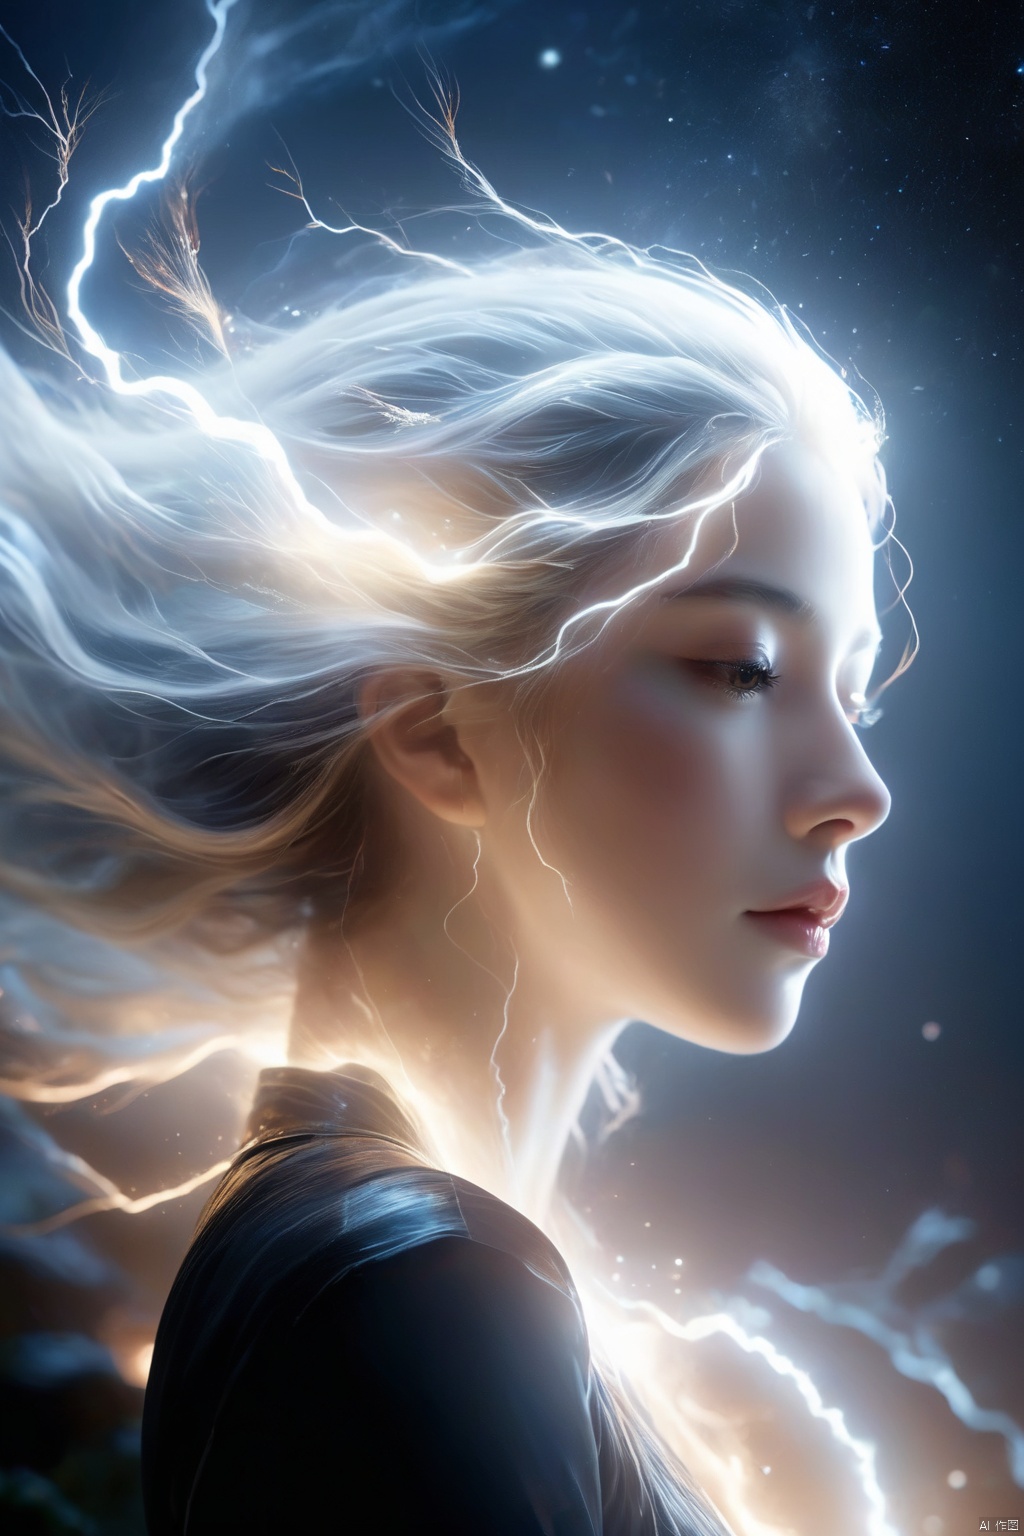  wabstyle, glowing, two-tone hair, glowing eyes, fog, mist, white, black, split theme, two-tone, moon, 1 girl, solo, glow, crie um prompt para criar imagens ilustrando Deus descendo no monte Sinal, quero imagen ultra realista e em 4k "Imagine an epic, ultra-realistic scene in 4K: Deus desce do Monte Sinai em meio a uma tempestade impressionante. The mountain is covered in lightning and dark clouds as lightning lights up the sky. God is surrounded by a divine aura, with flowing white beards and eyes that radiate wisdom and power. Its majestic figure slowly descends towards the earth, com um manto que parece feito de estrelas cintilantes. As he descends, The surrounding landscape is bathed in a heavenly light, And the people below look on with reverence and admiration.", (photorealistic:1.4), cowboy shot, Surrealism, Futurism, god rays, Sony FE GM, UHD, masterpiece, ccurate, high details, high quality, highres, 16k